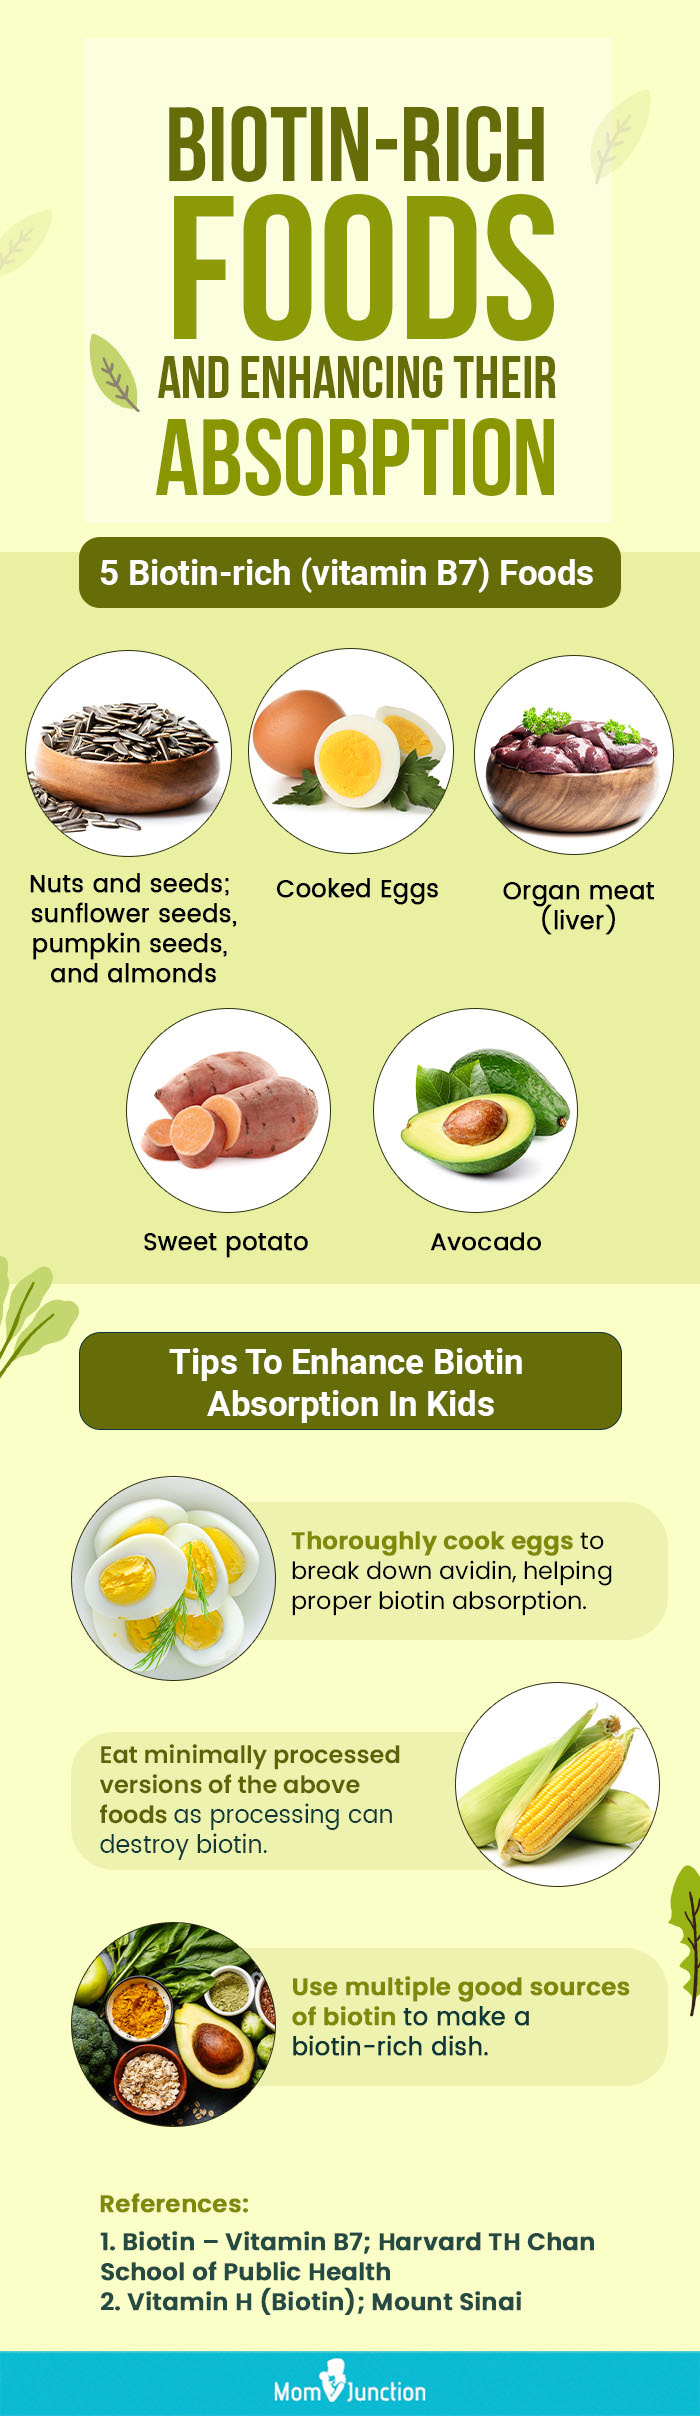 biotin rich foods and enhancing their absorption [infographic]